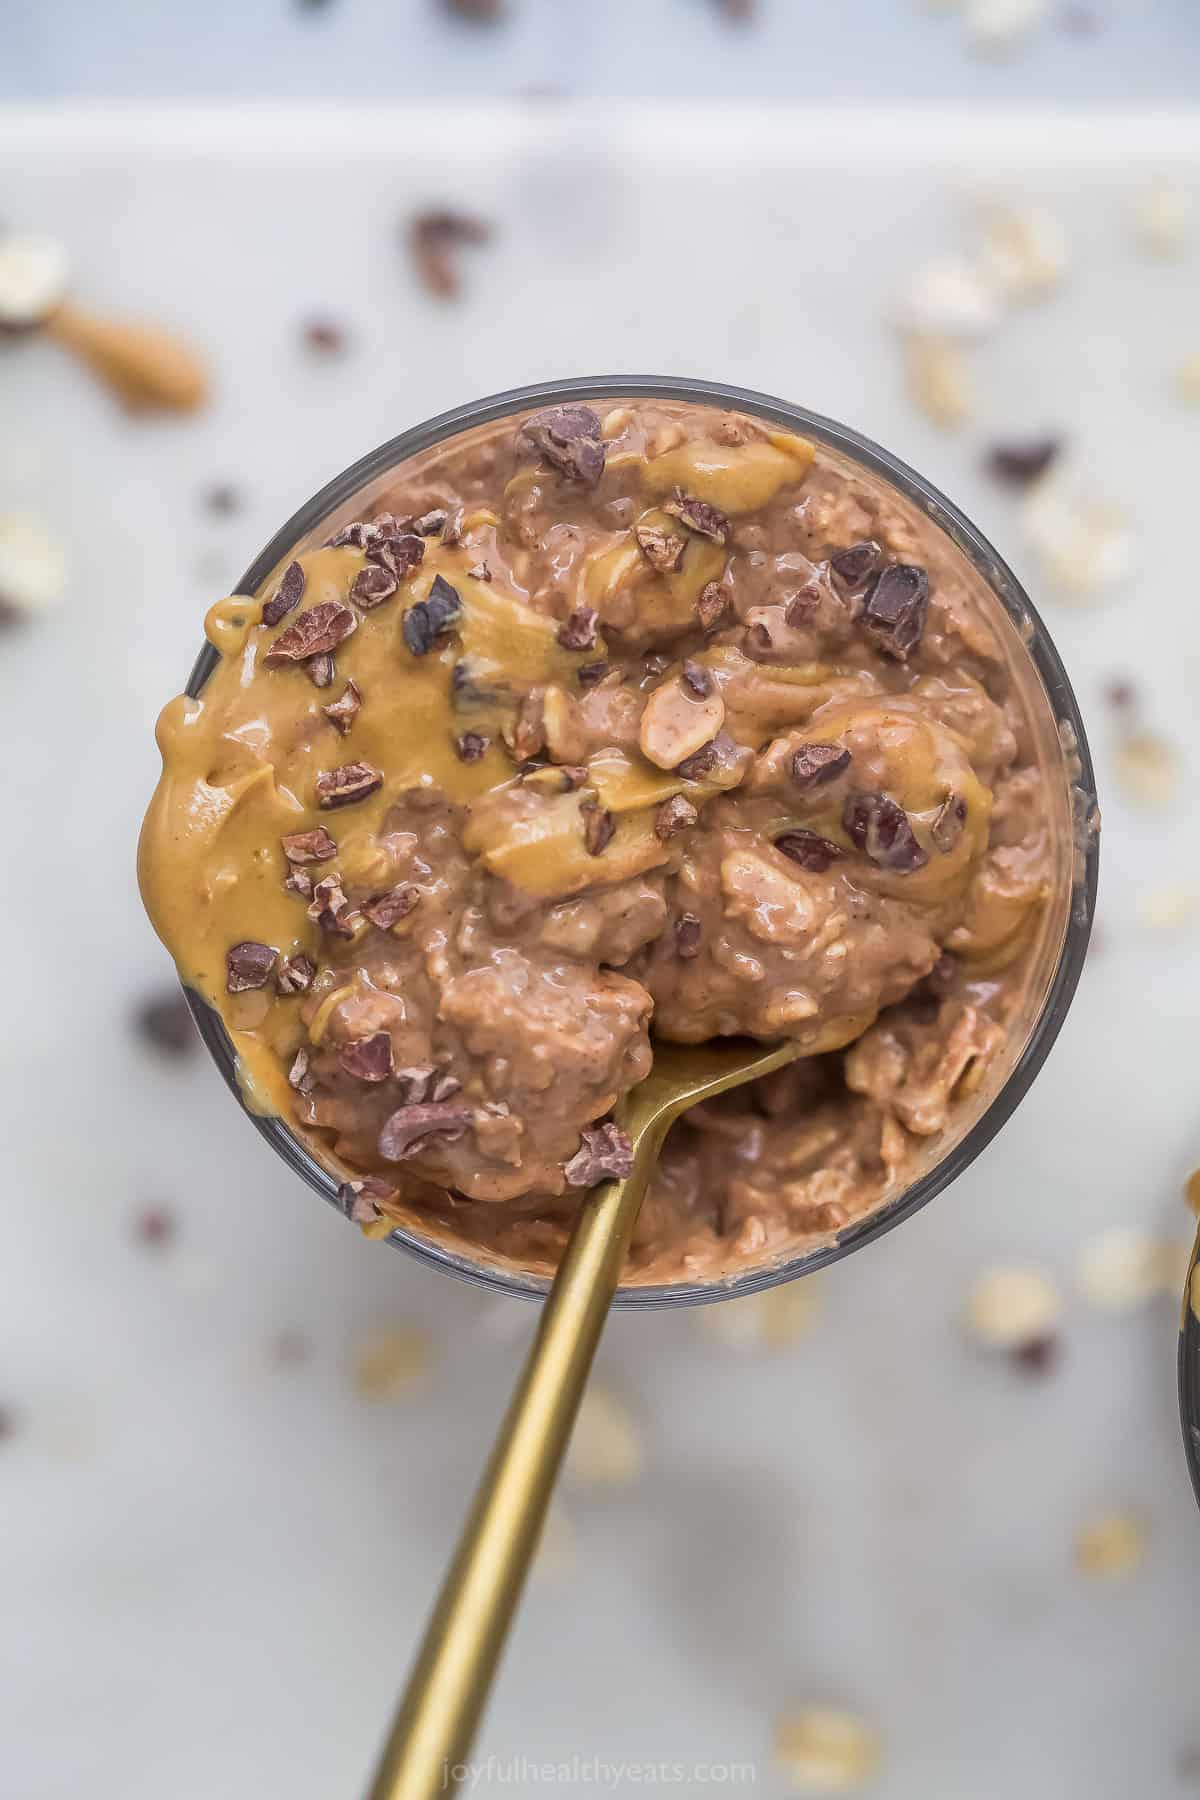 Overhead view of a dish of chocolate peanut butter overnight oats with a spoon